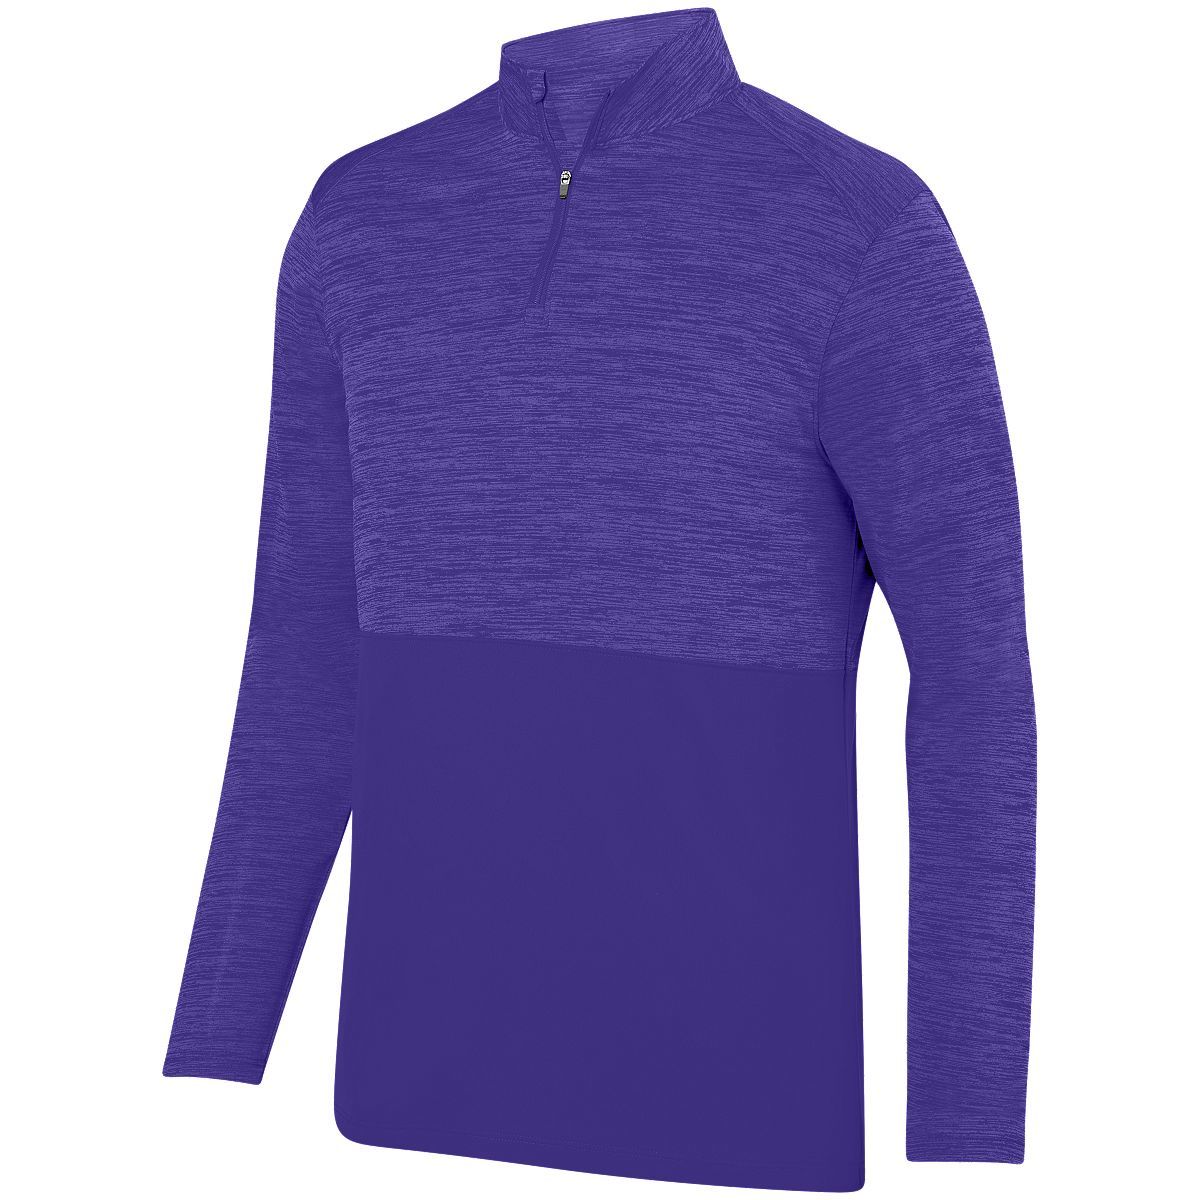 Augusta Sportswear Shadow Tonal Heather 1/4 Zip Pullover in Purple  -Part of the Adult, Adult-Pullover, Augusta-Products, Outerwear, Tonal-Fleece-Collection product lines at KanaleyCreations.com